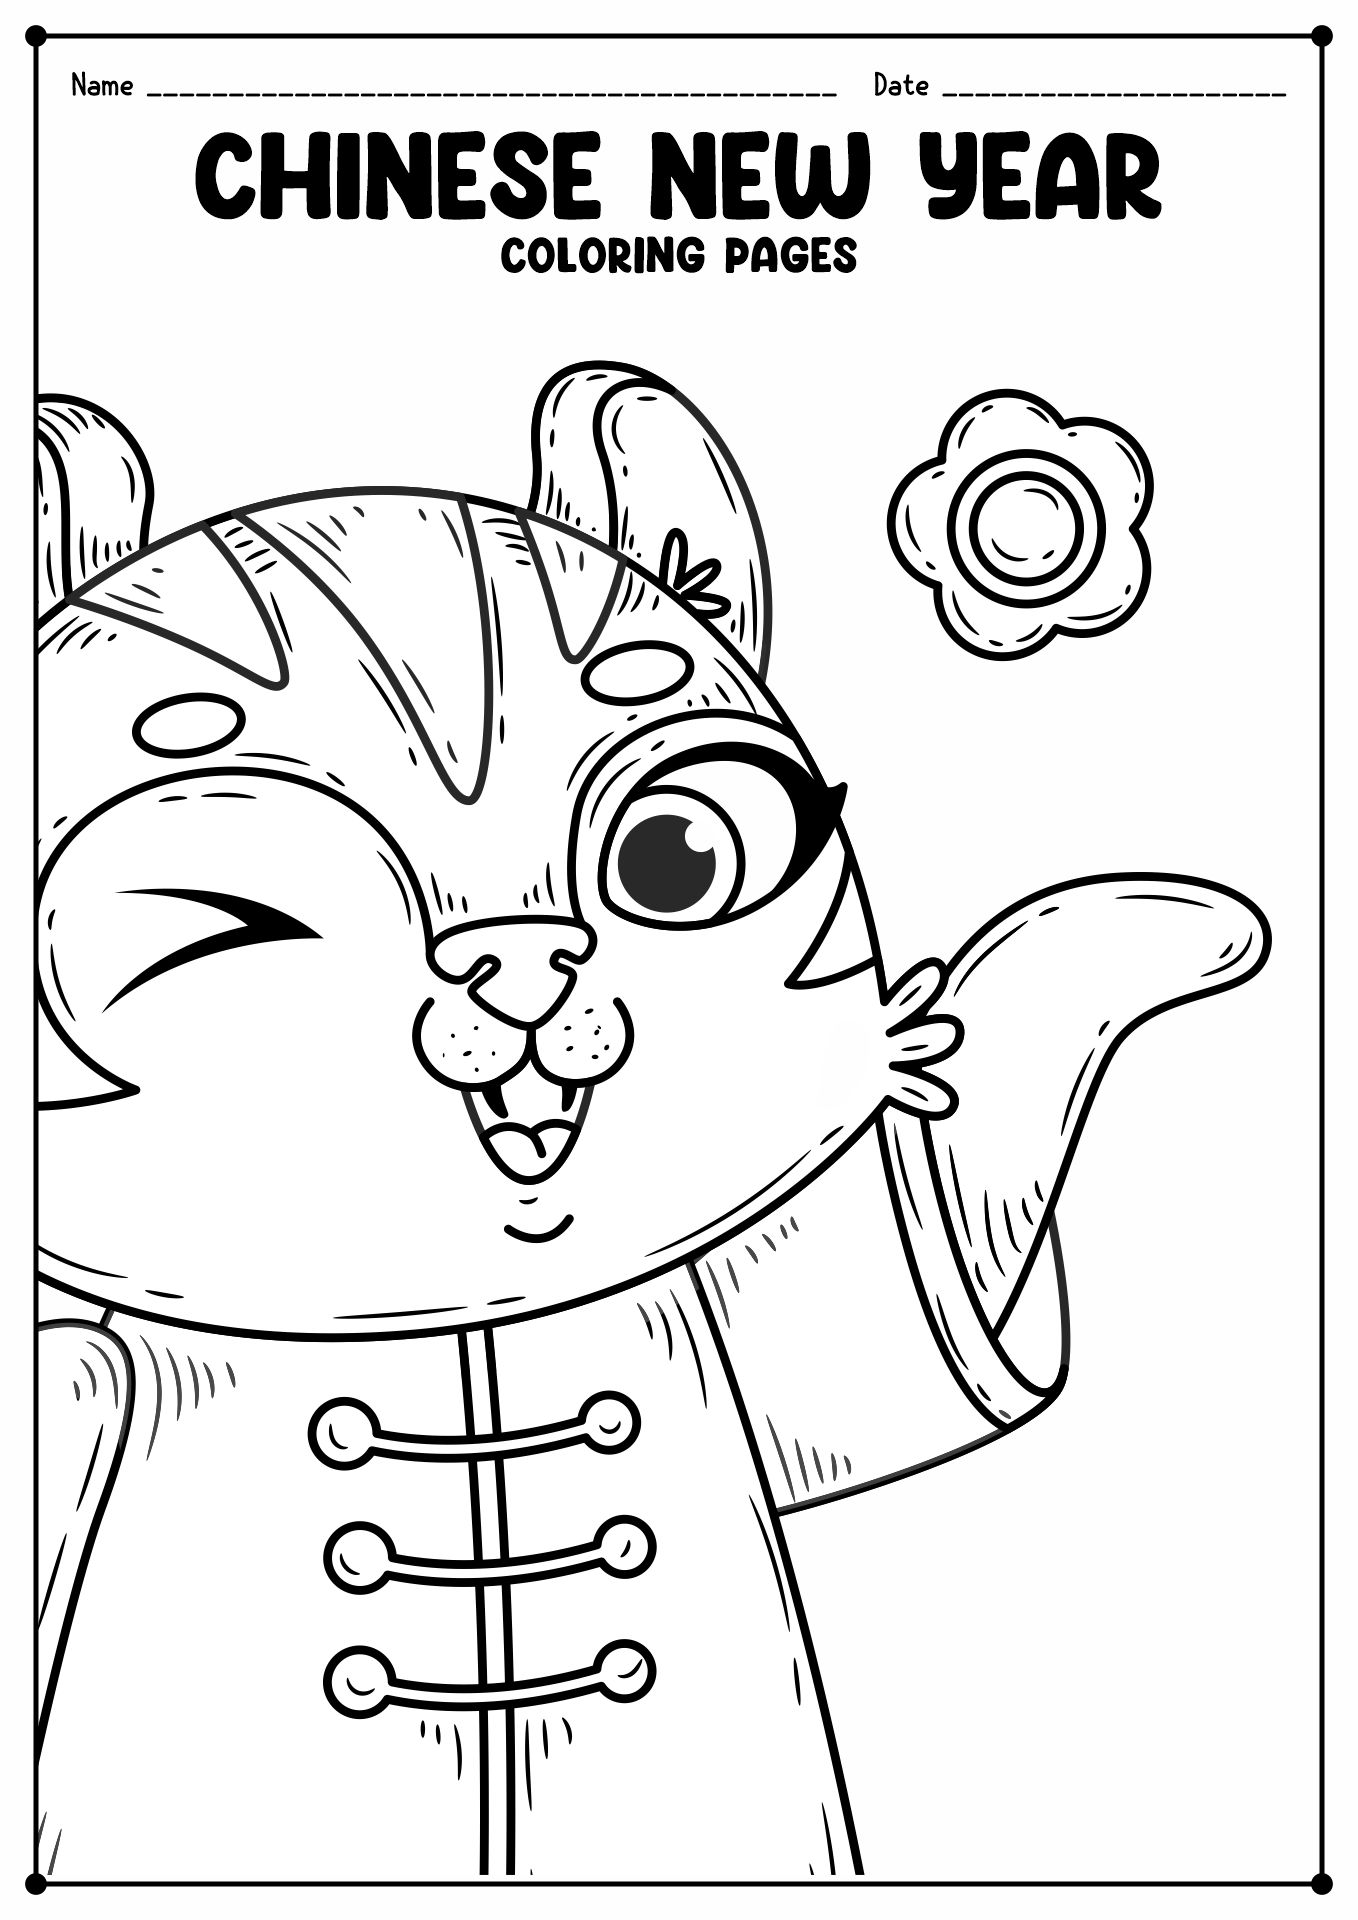 Chinese New Year Coloring Sheet Image